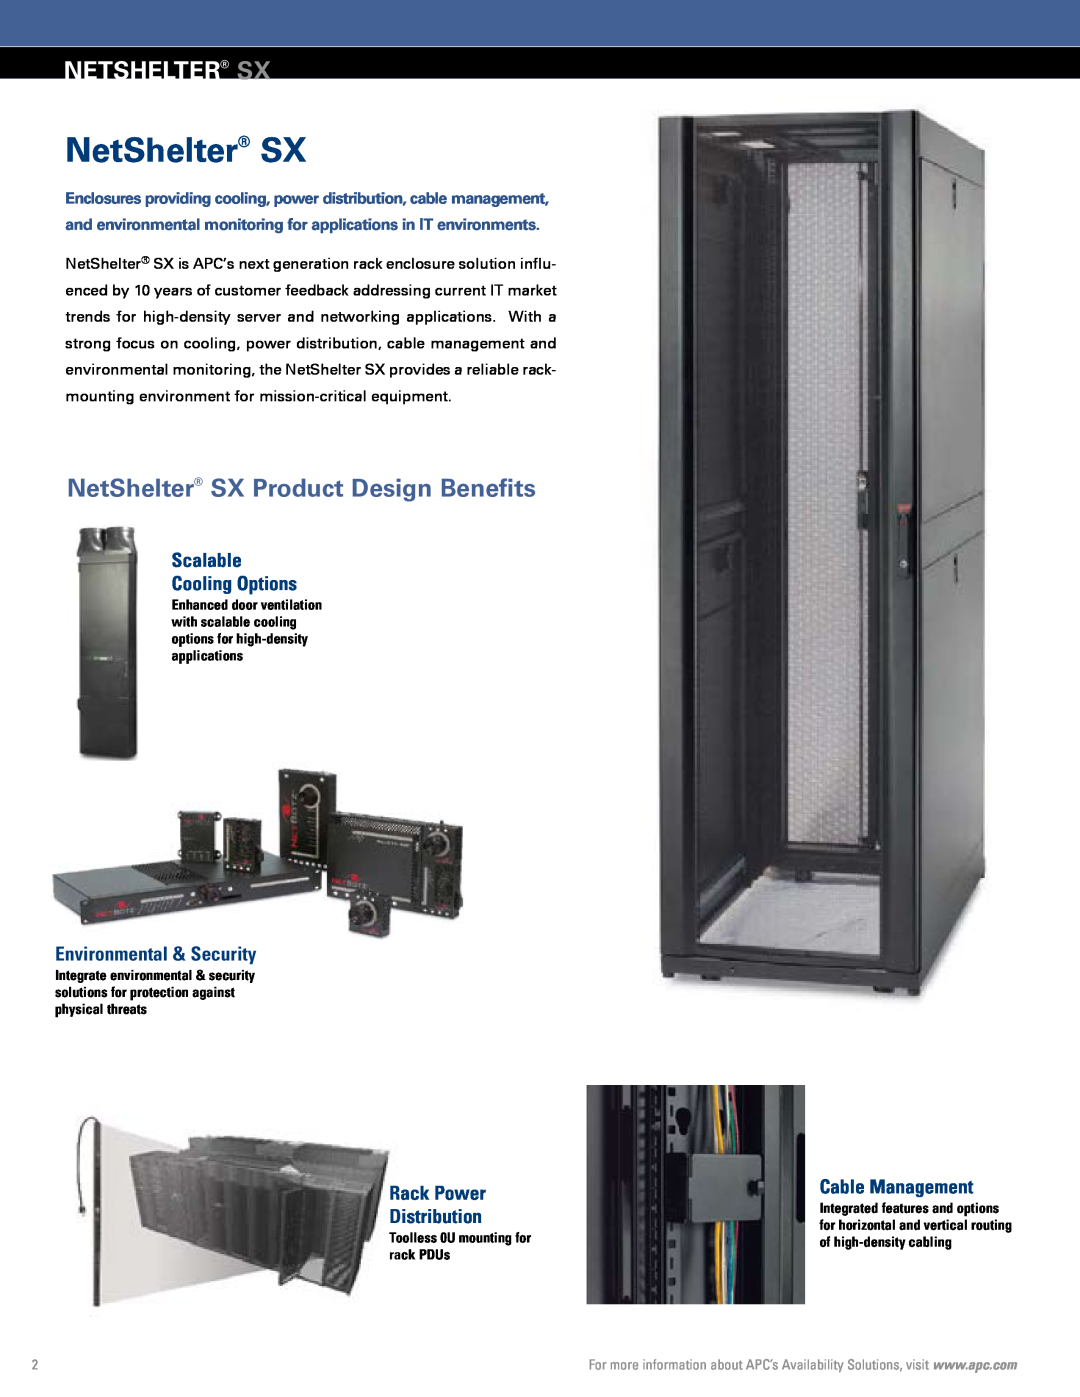 APC Rack Systems netshelter SX, NetShelter SX Product Design Benefits, Scalable Cooling Options, Cable Management 